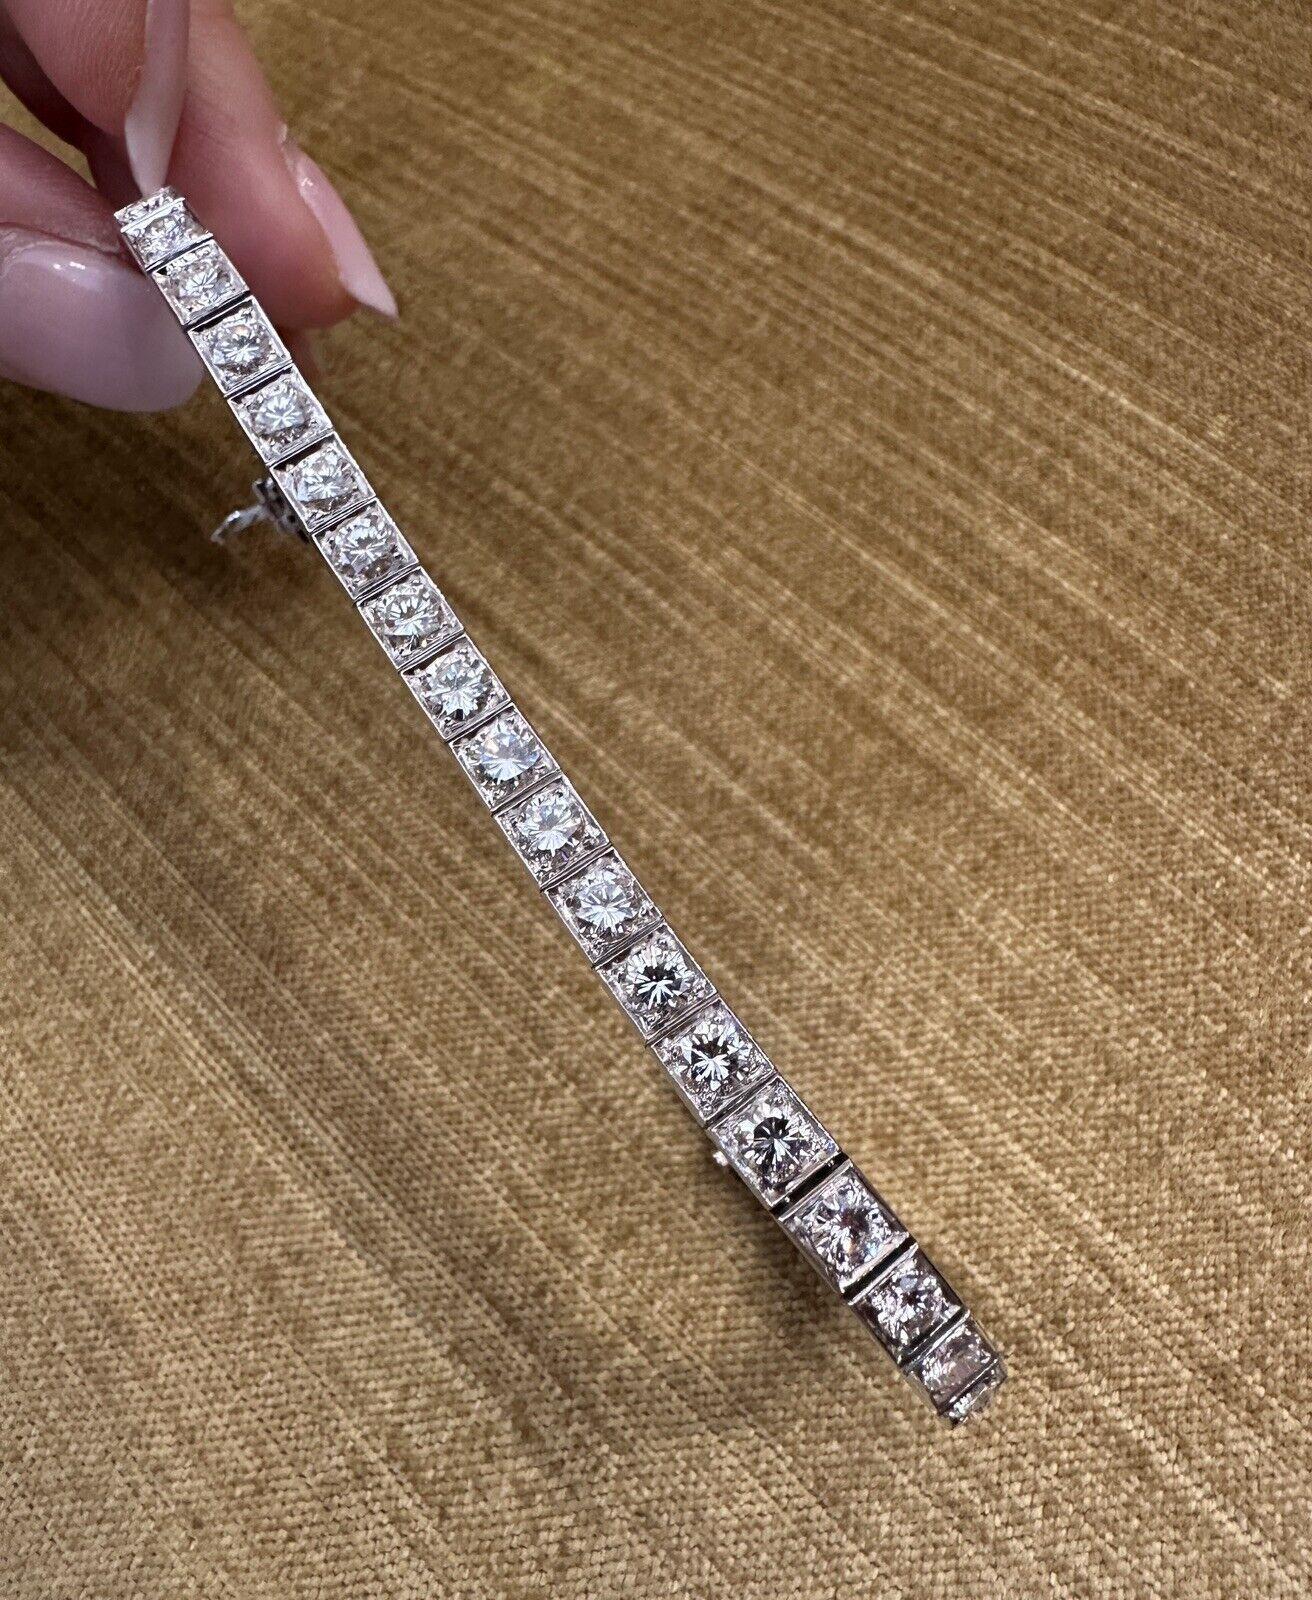 Vintage 8 carats Diamond Tennis Line Bracelet in Platinum

Vintage Diamond Bracelet features 34 Round Brilliant Cut diamonds set in a high polished platinum setting. Bracelet is secured by a squeeze tongue clasp with safety bar and safety